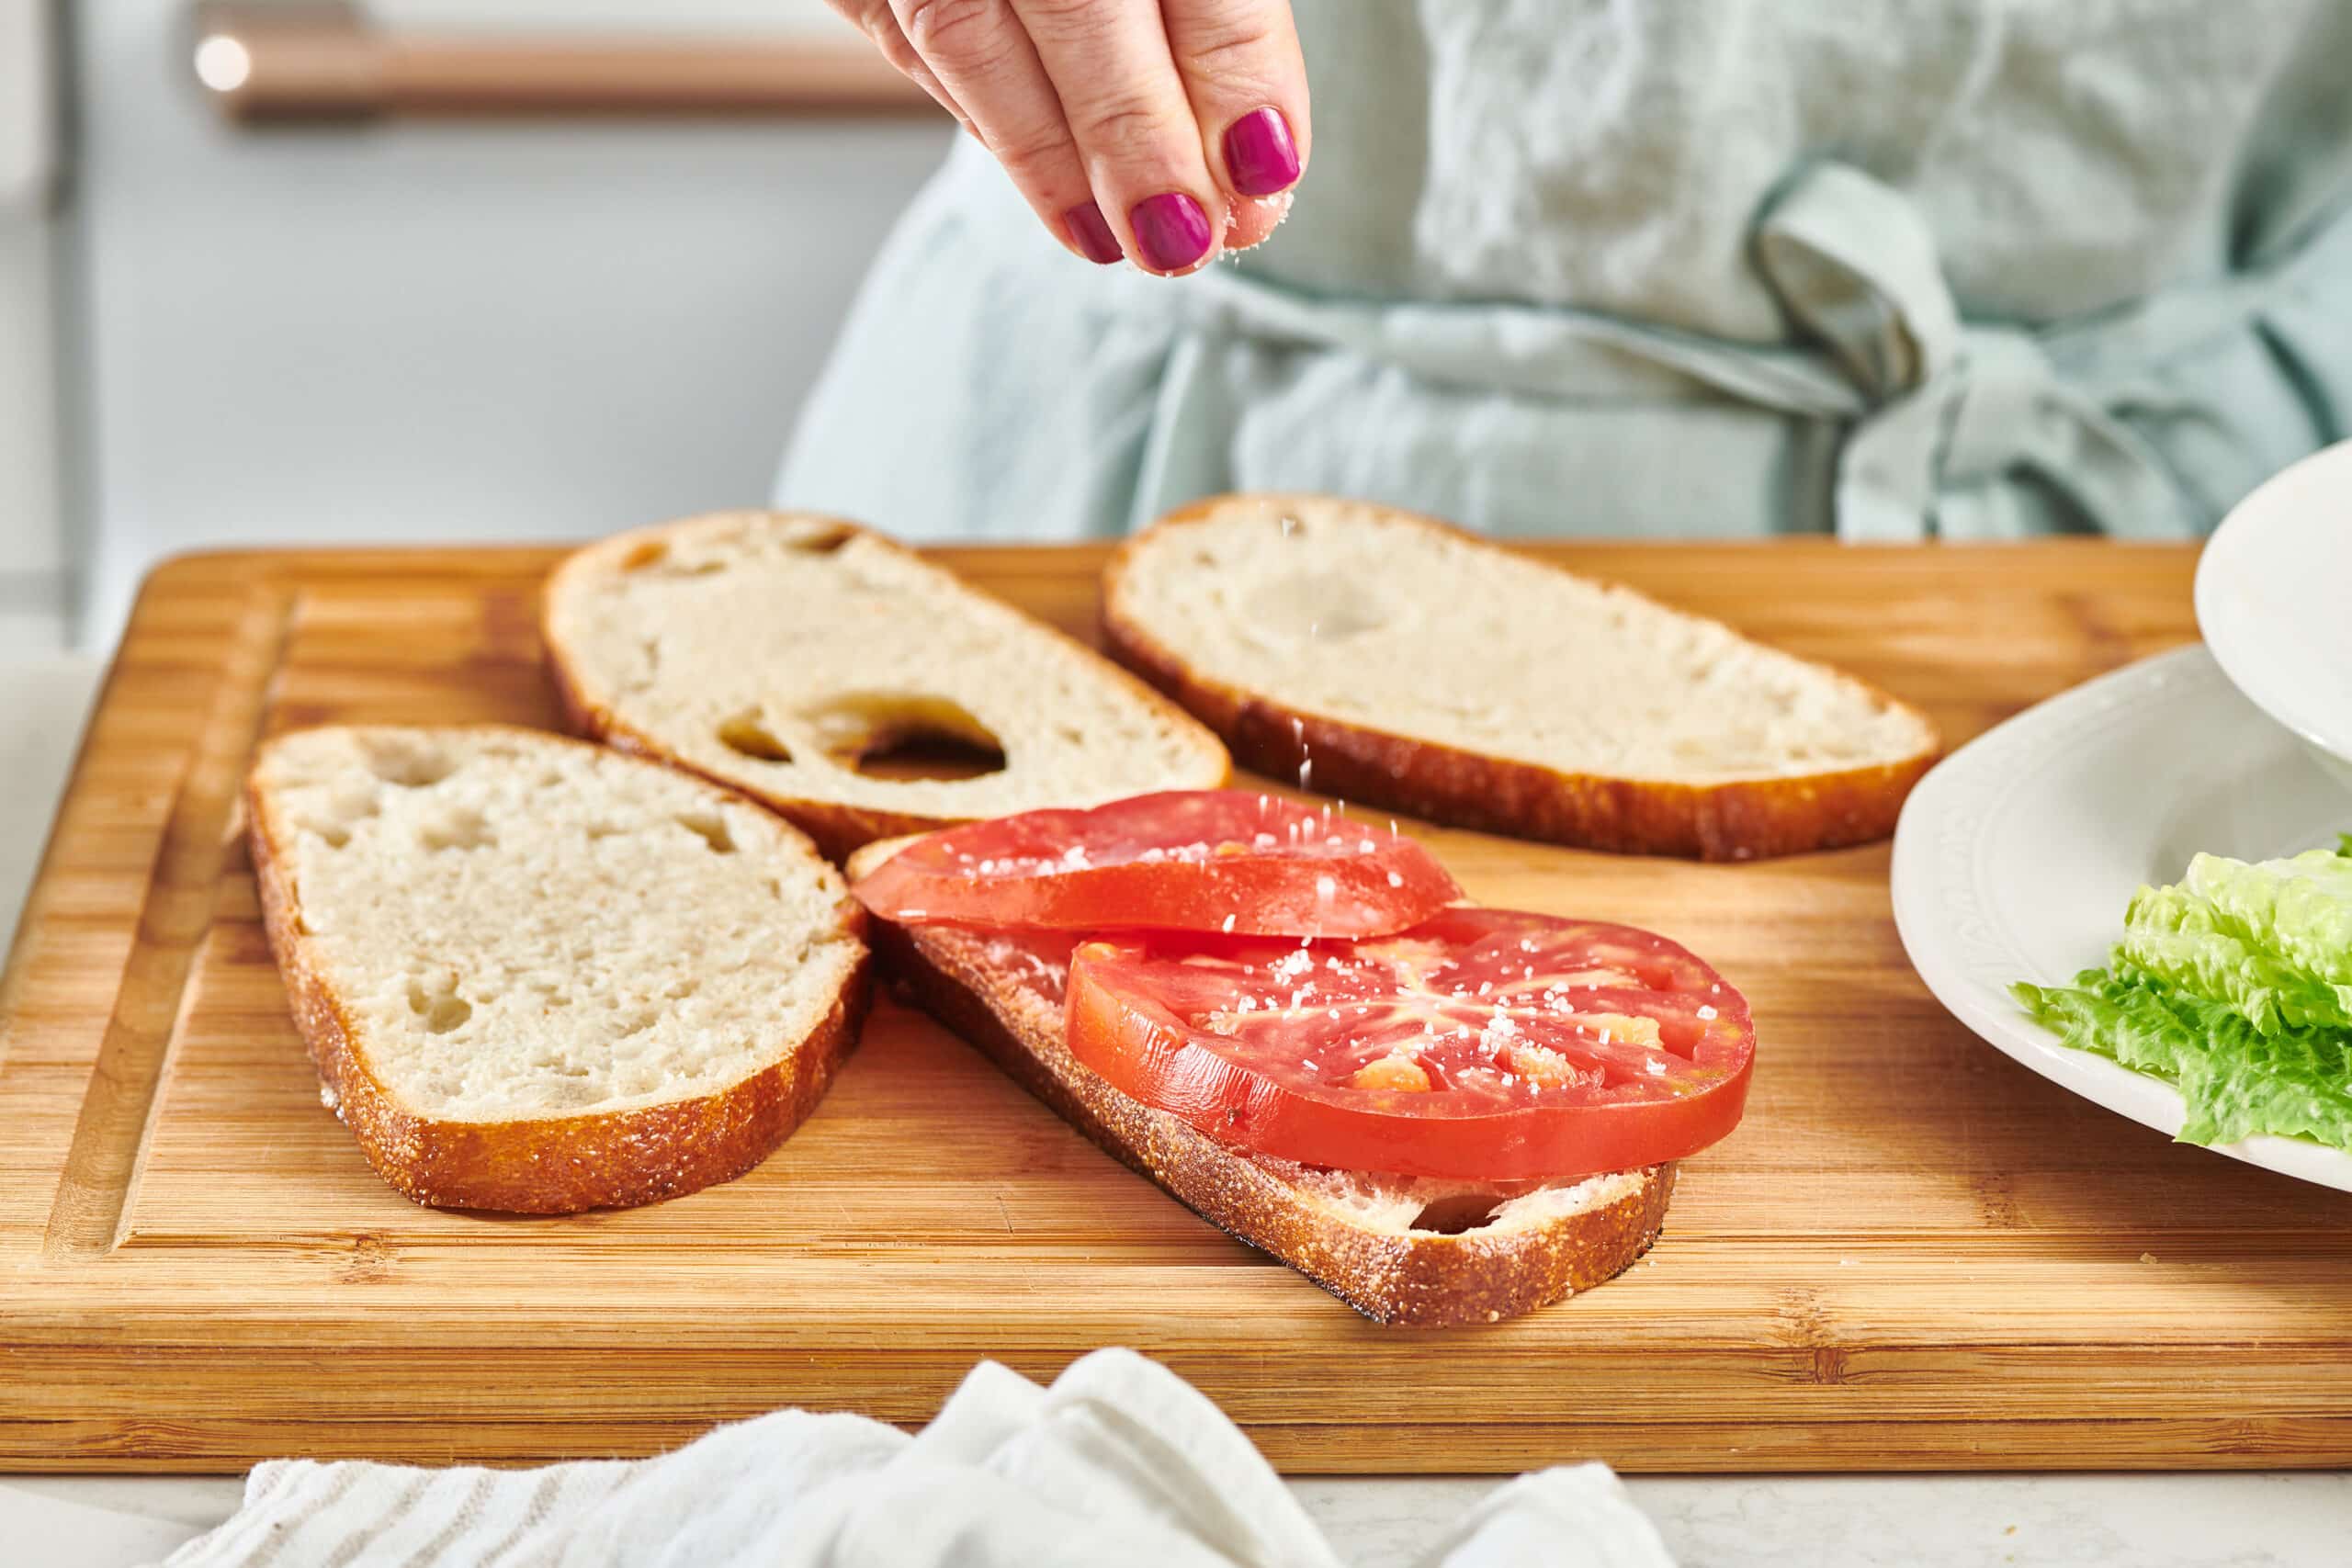 A woman's hand sprinkling kosher salt on a tomato placed on a piece of bread on a cutting board, with other slices of bread on the board.